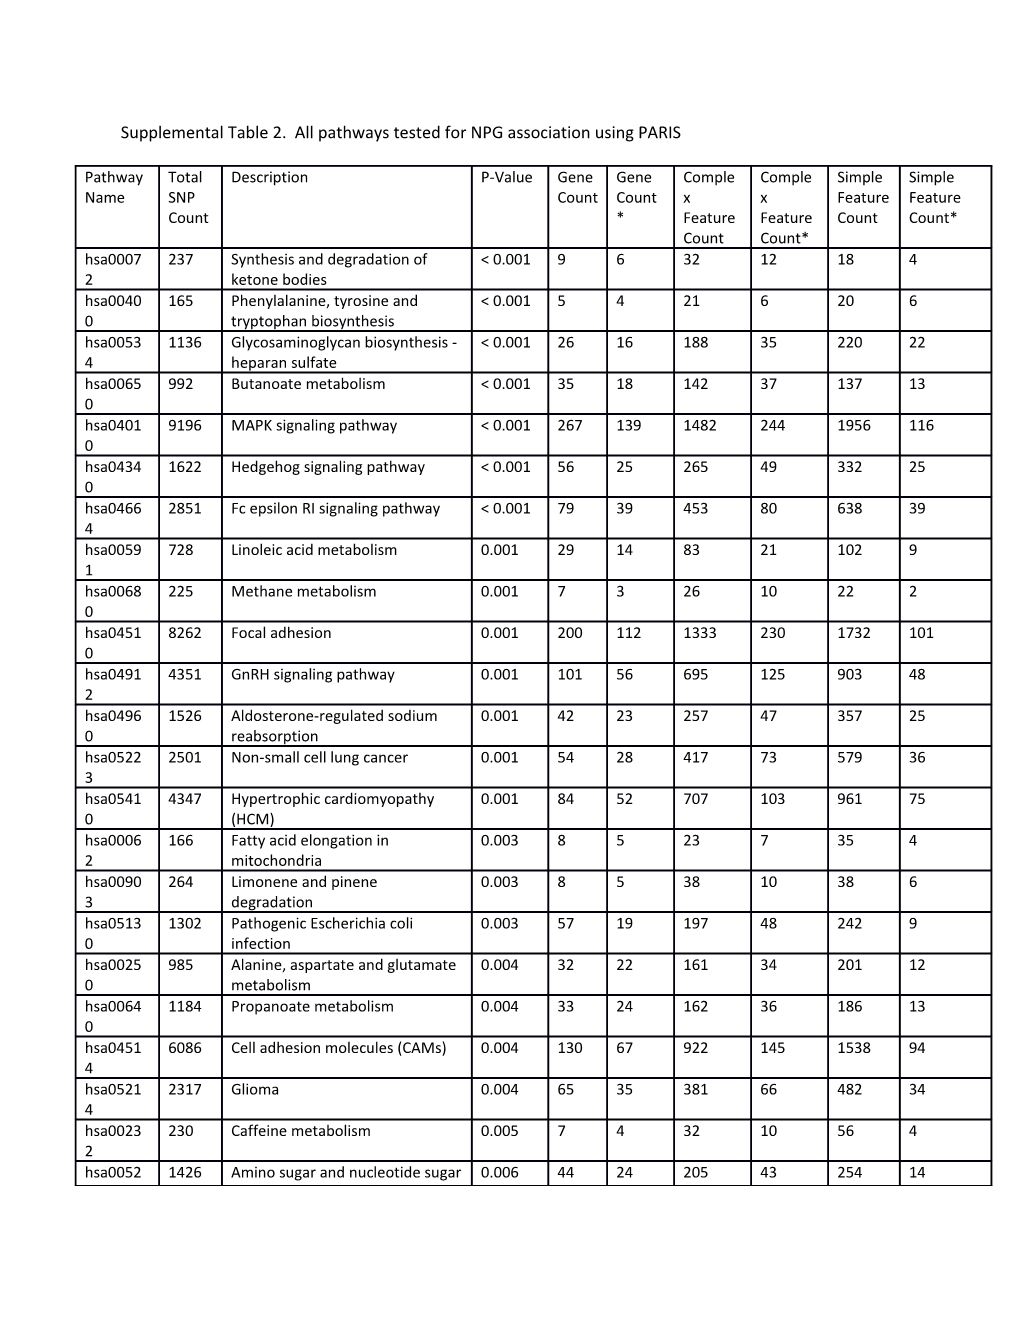 Supplemental Table 2. All Pathways Tested for NPG Association Using PARIS